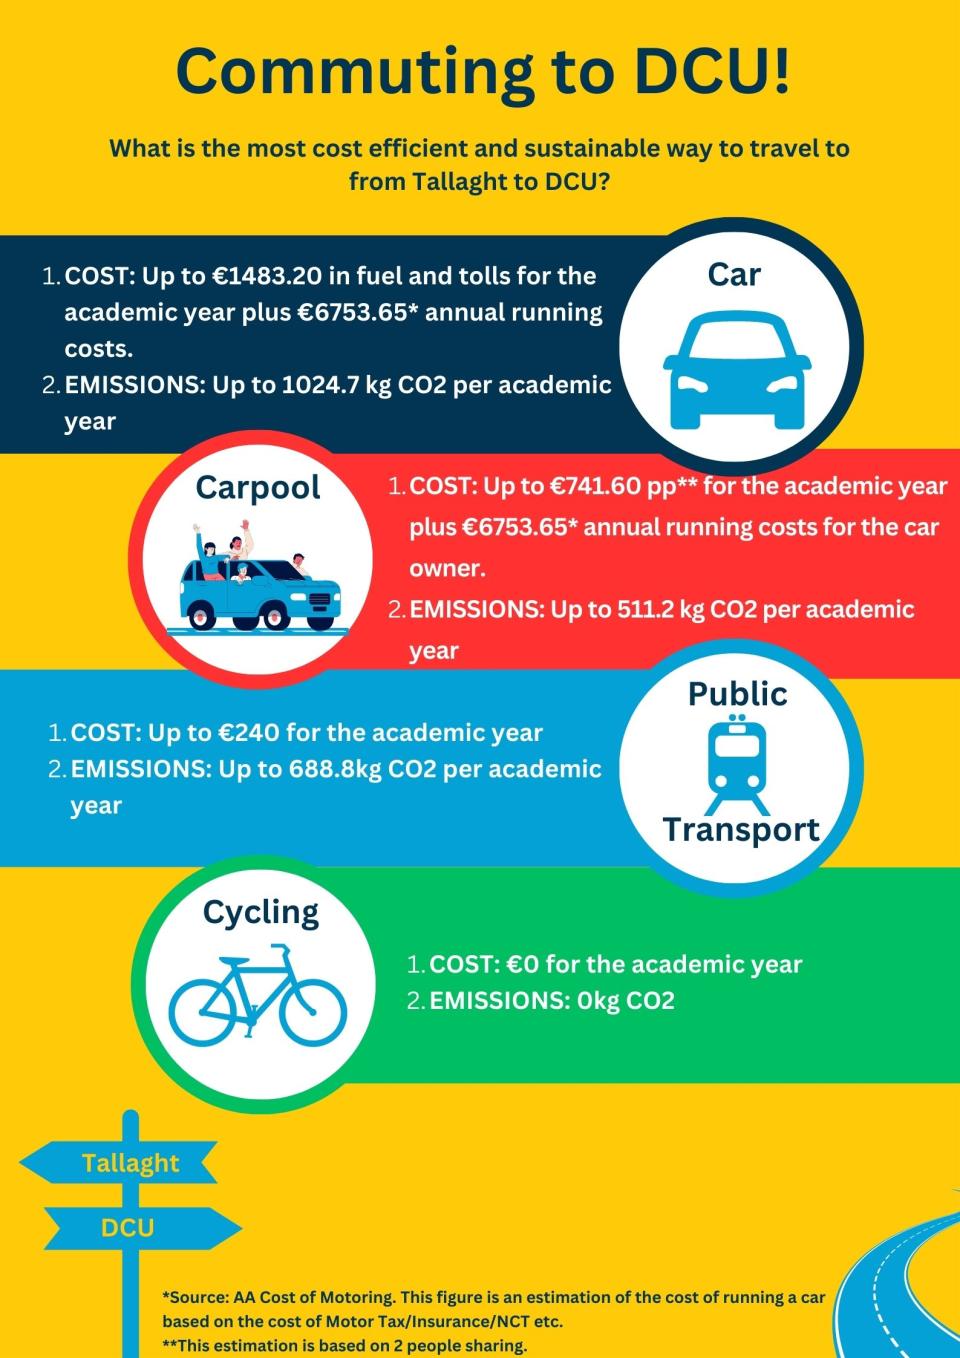 Comparison of cost and emissions associated with travelling to DCU throughout academic year via different transport modes. Car - €1483.20 in fuel and tolls, 1024.7kg CO2 in emissions. Carpool - €741 per person in fuel and tolls, 512kg CO2 in emissions.  Public Transport - €240 in fares, 688.8kg CO2 in emissions. Cycling -€0 in costs and 0kg of CO2 in emissions.